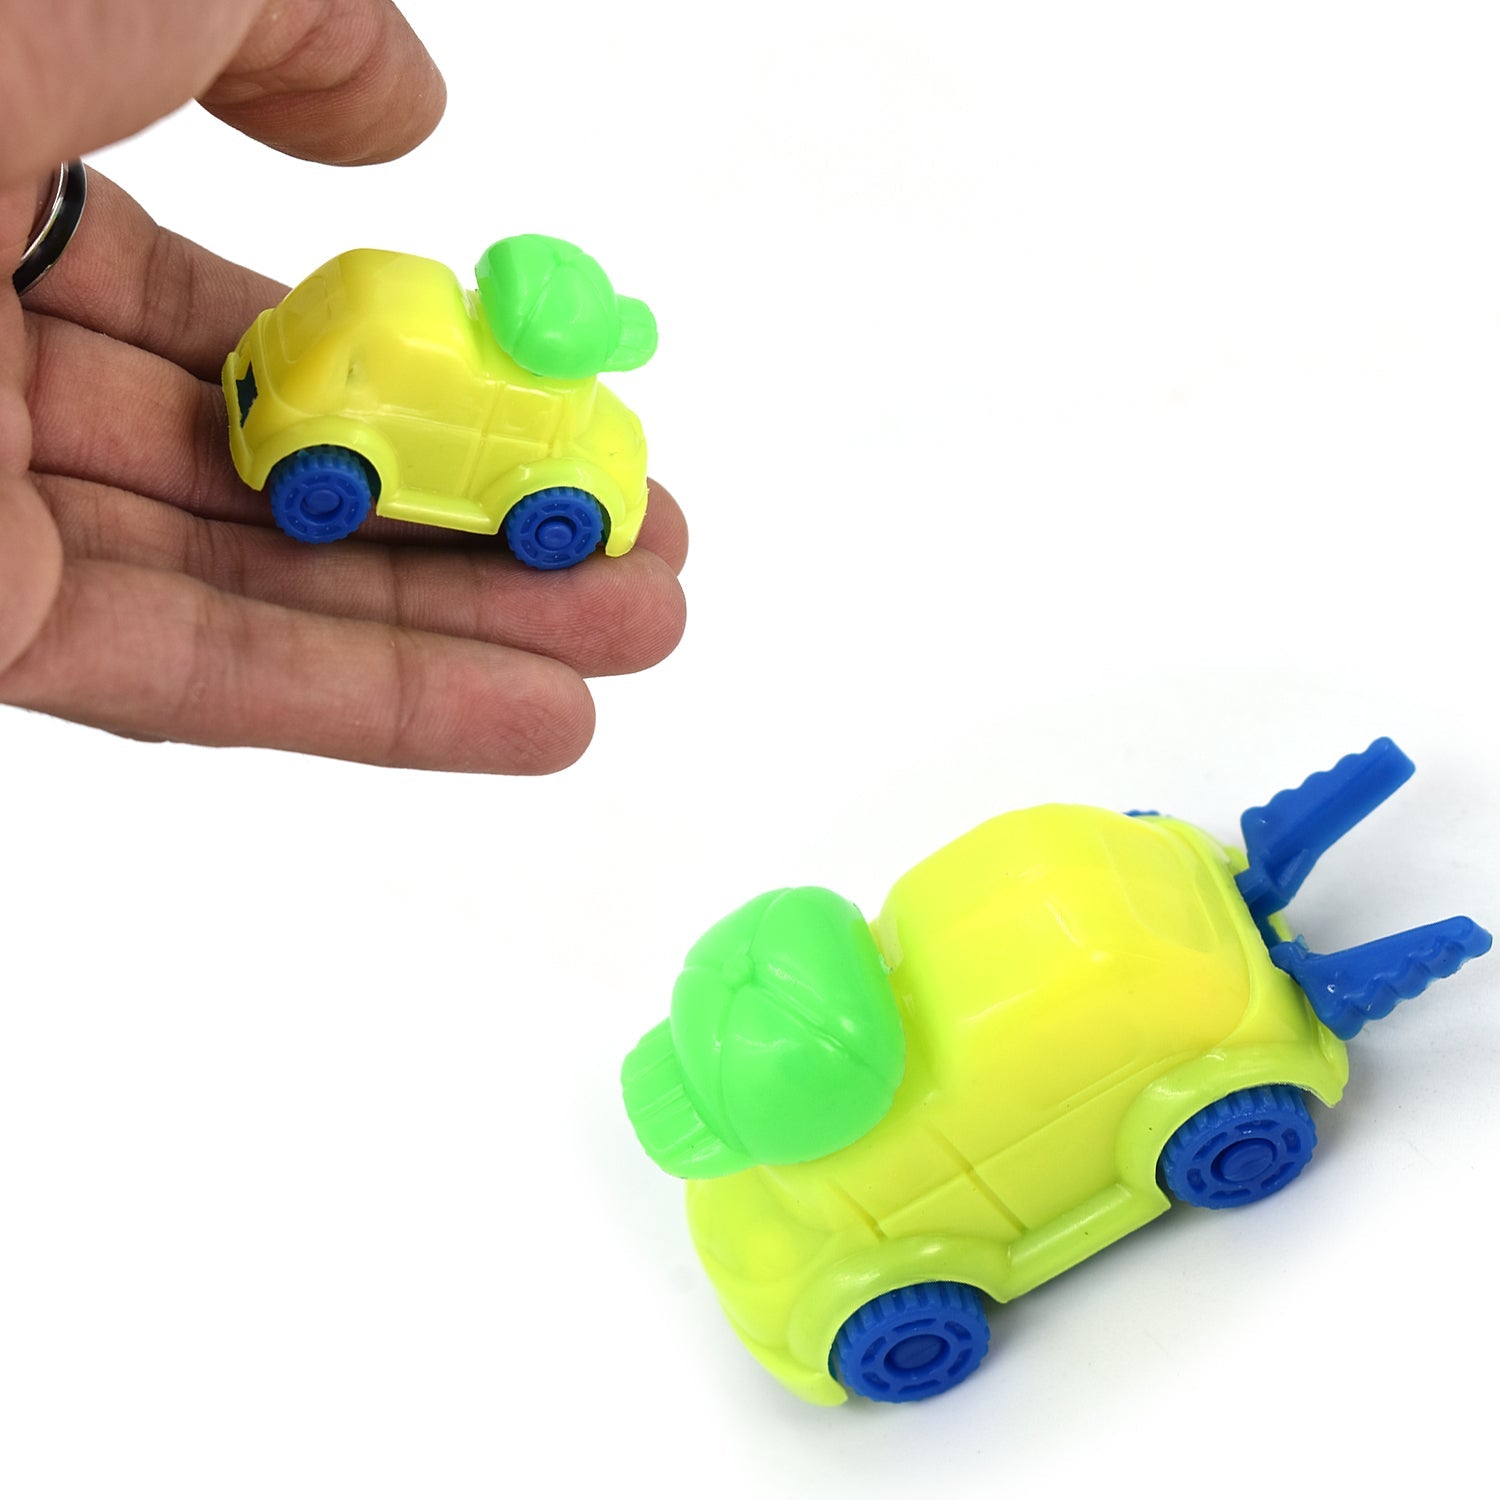 4422 30PC MINI PULL BACK CAR USED WIDELY BY KIDS AND CHILDRENS FOR PLAYING AND ENJOYING PURPOSES DeoDap